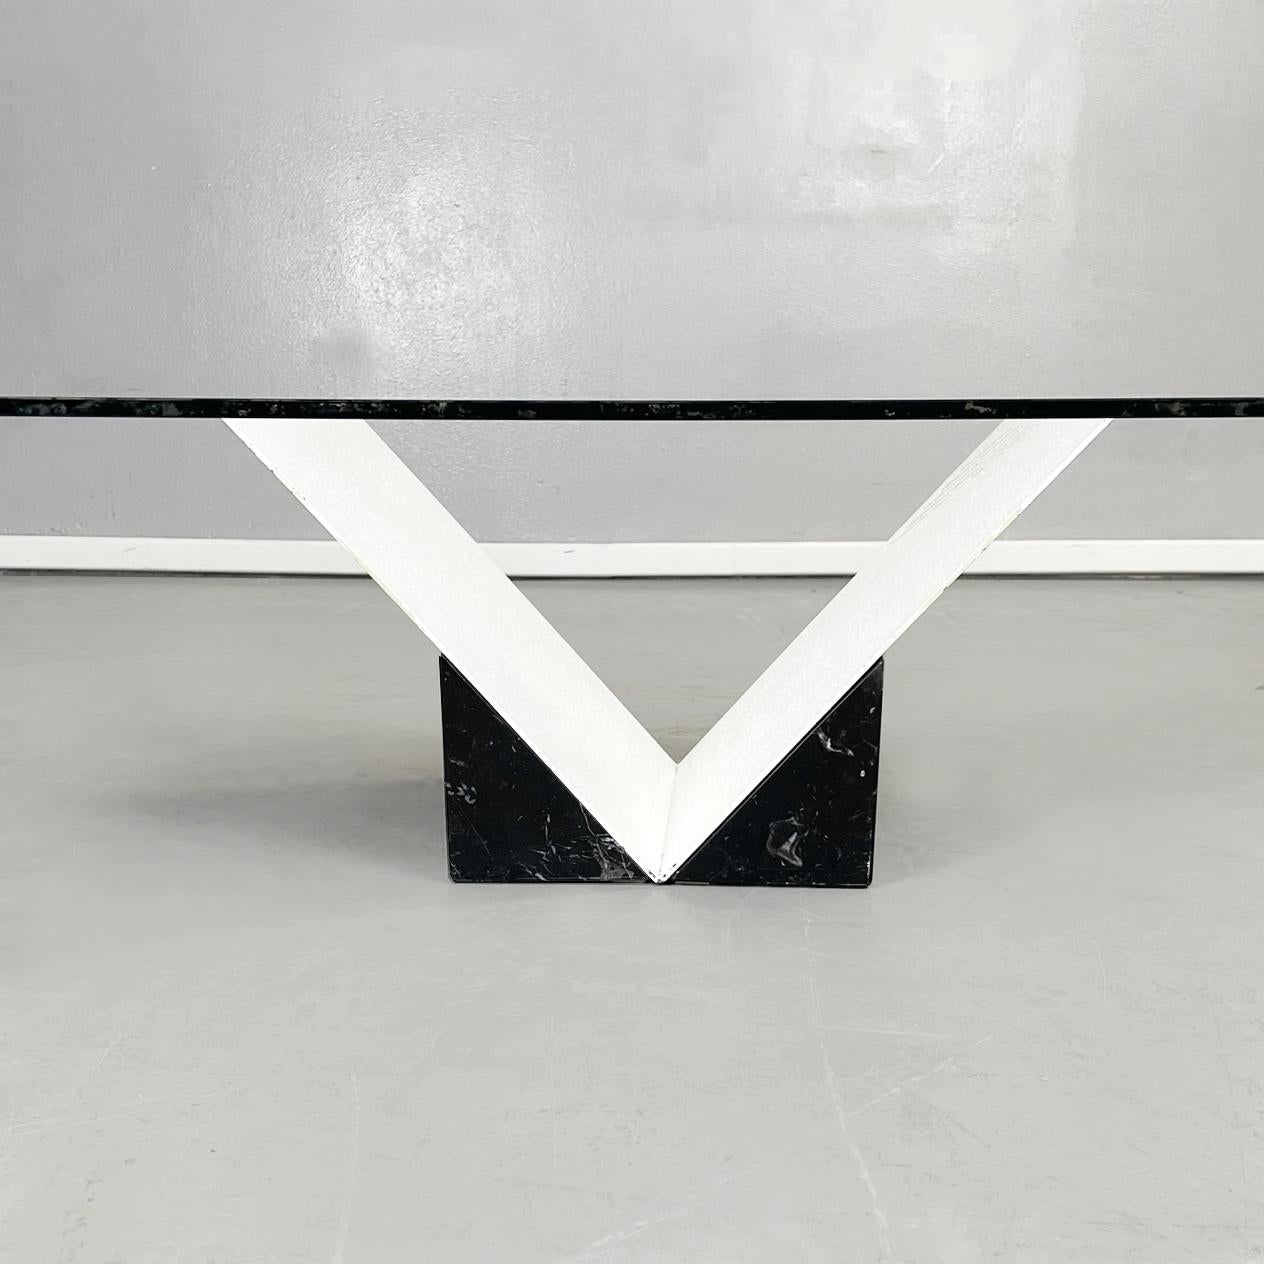 Late 20th Century Italian Modern Coffee Table in Glass, White Metal, Black Marquinia Marble, 1980s For Sale